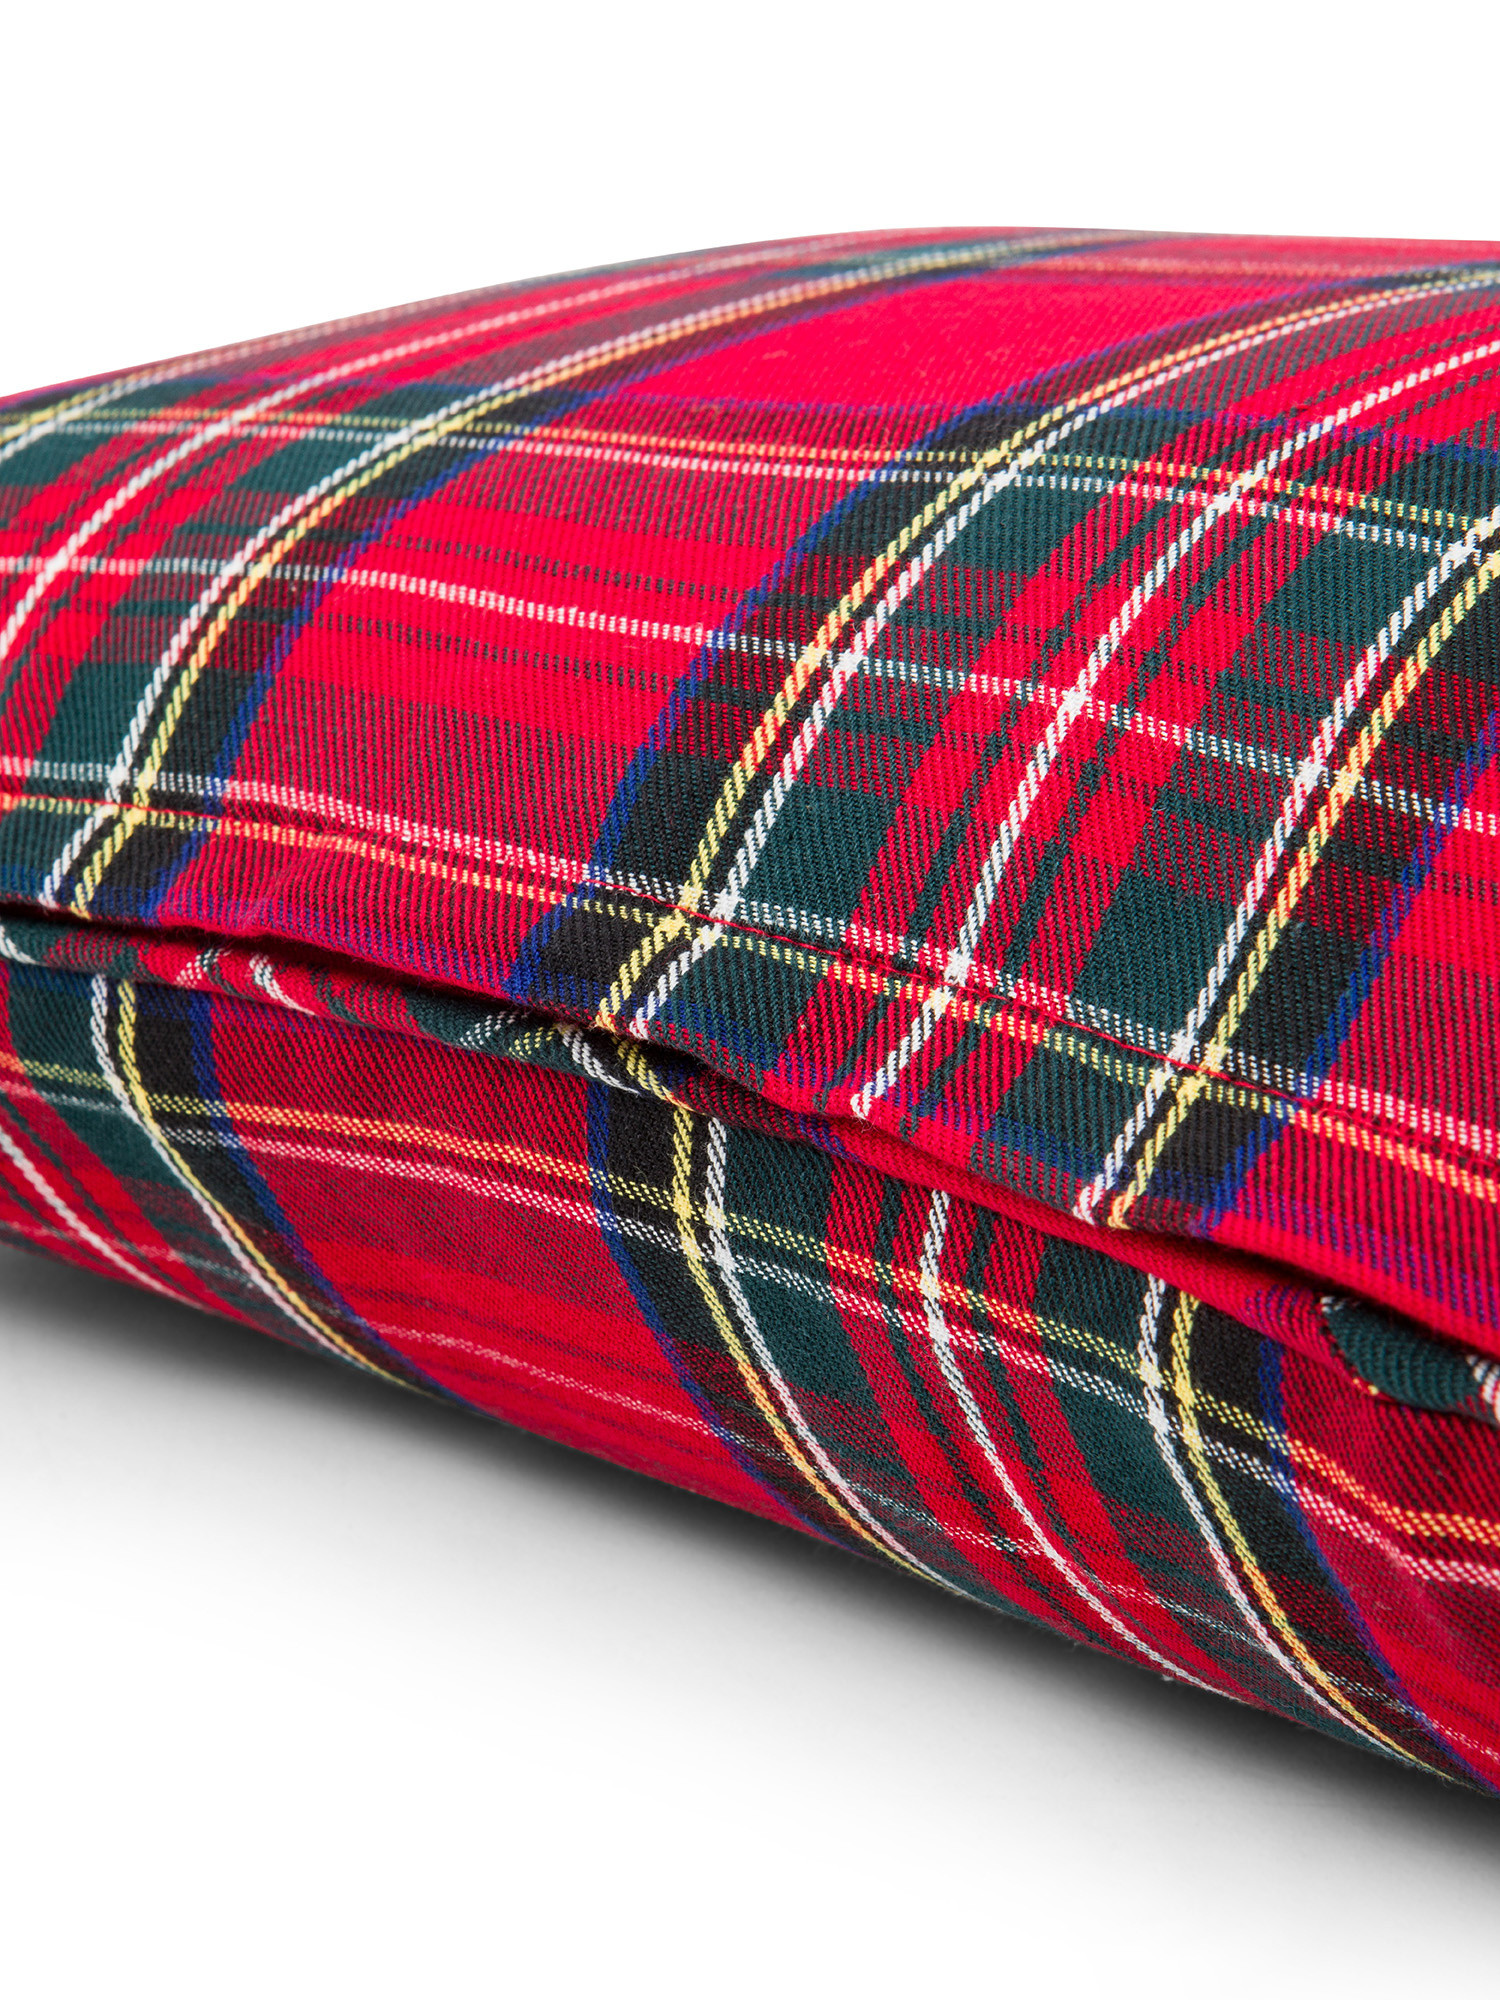 Cuscino cotone tartan 35x50cm, Rosso, large image number 1